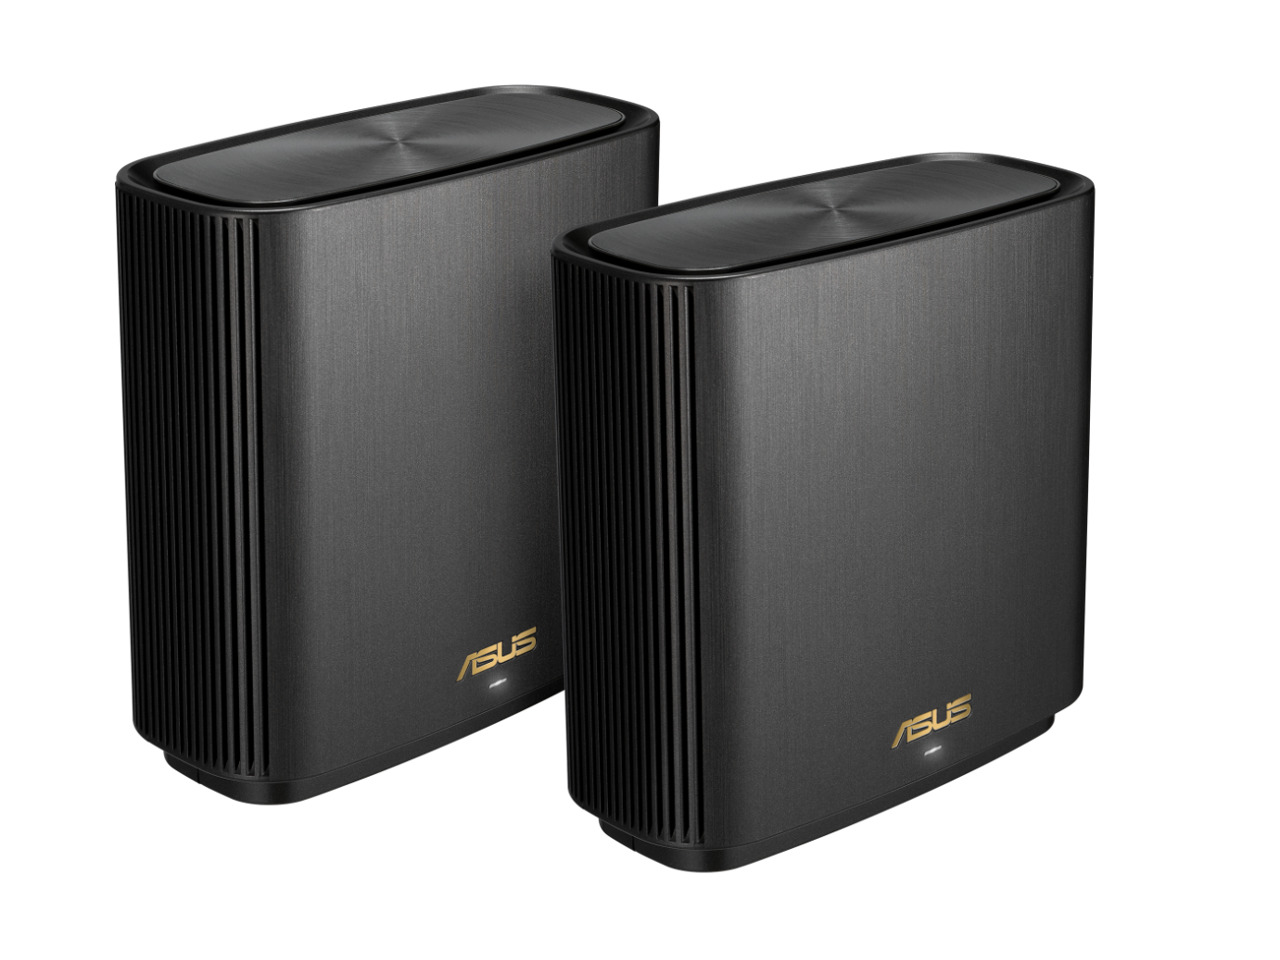 ASUS ZenWiFi XT9 AX7800 Tri-Band WiFi6 Mesh WiFiSystem (2Pack), 802.11ax, up to